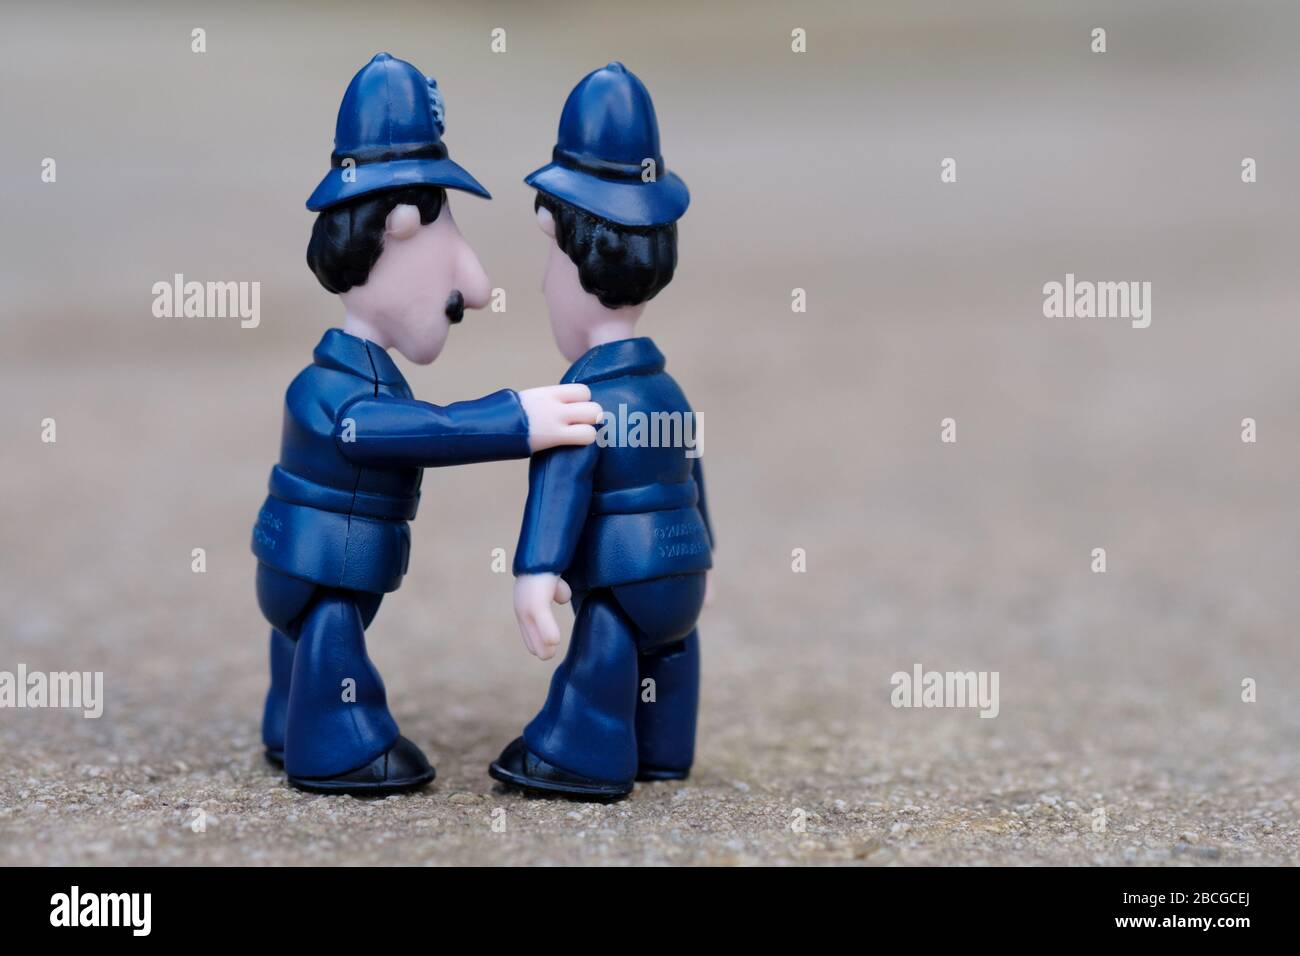 A comical shot of two toy English Policeman. One has his hand on the others shoulder and appears to be talking quietly to him Stock Photo